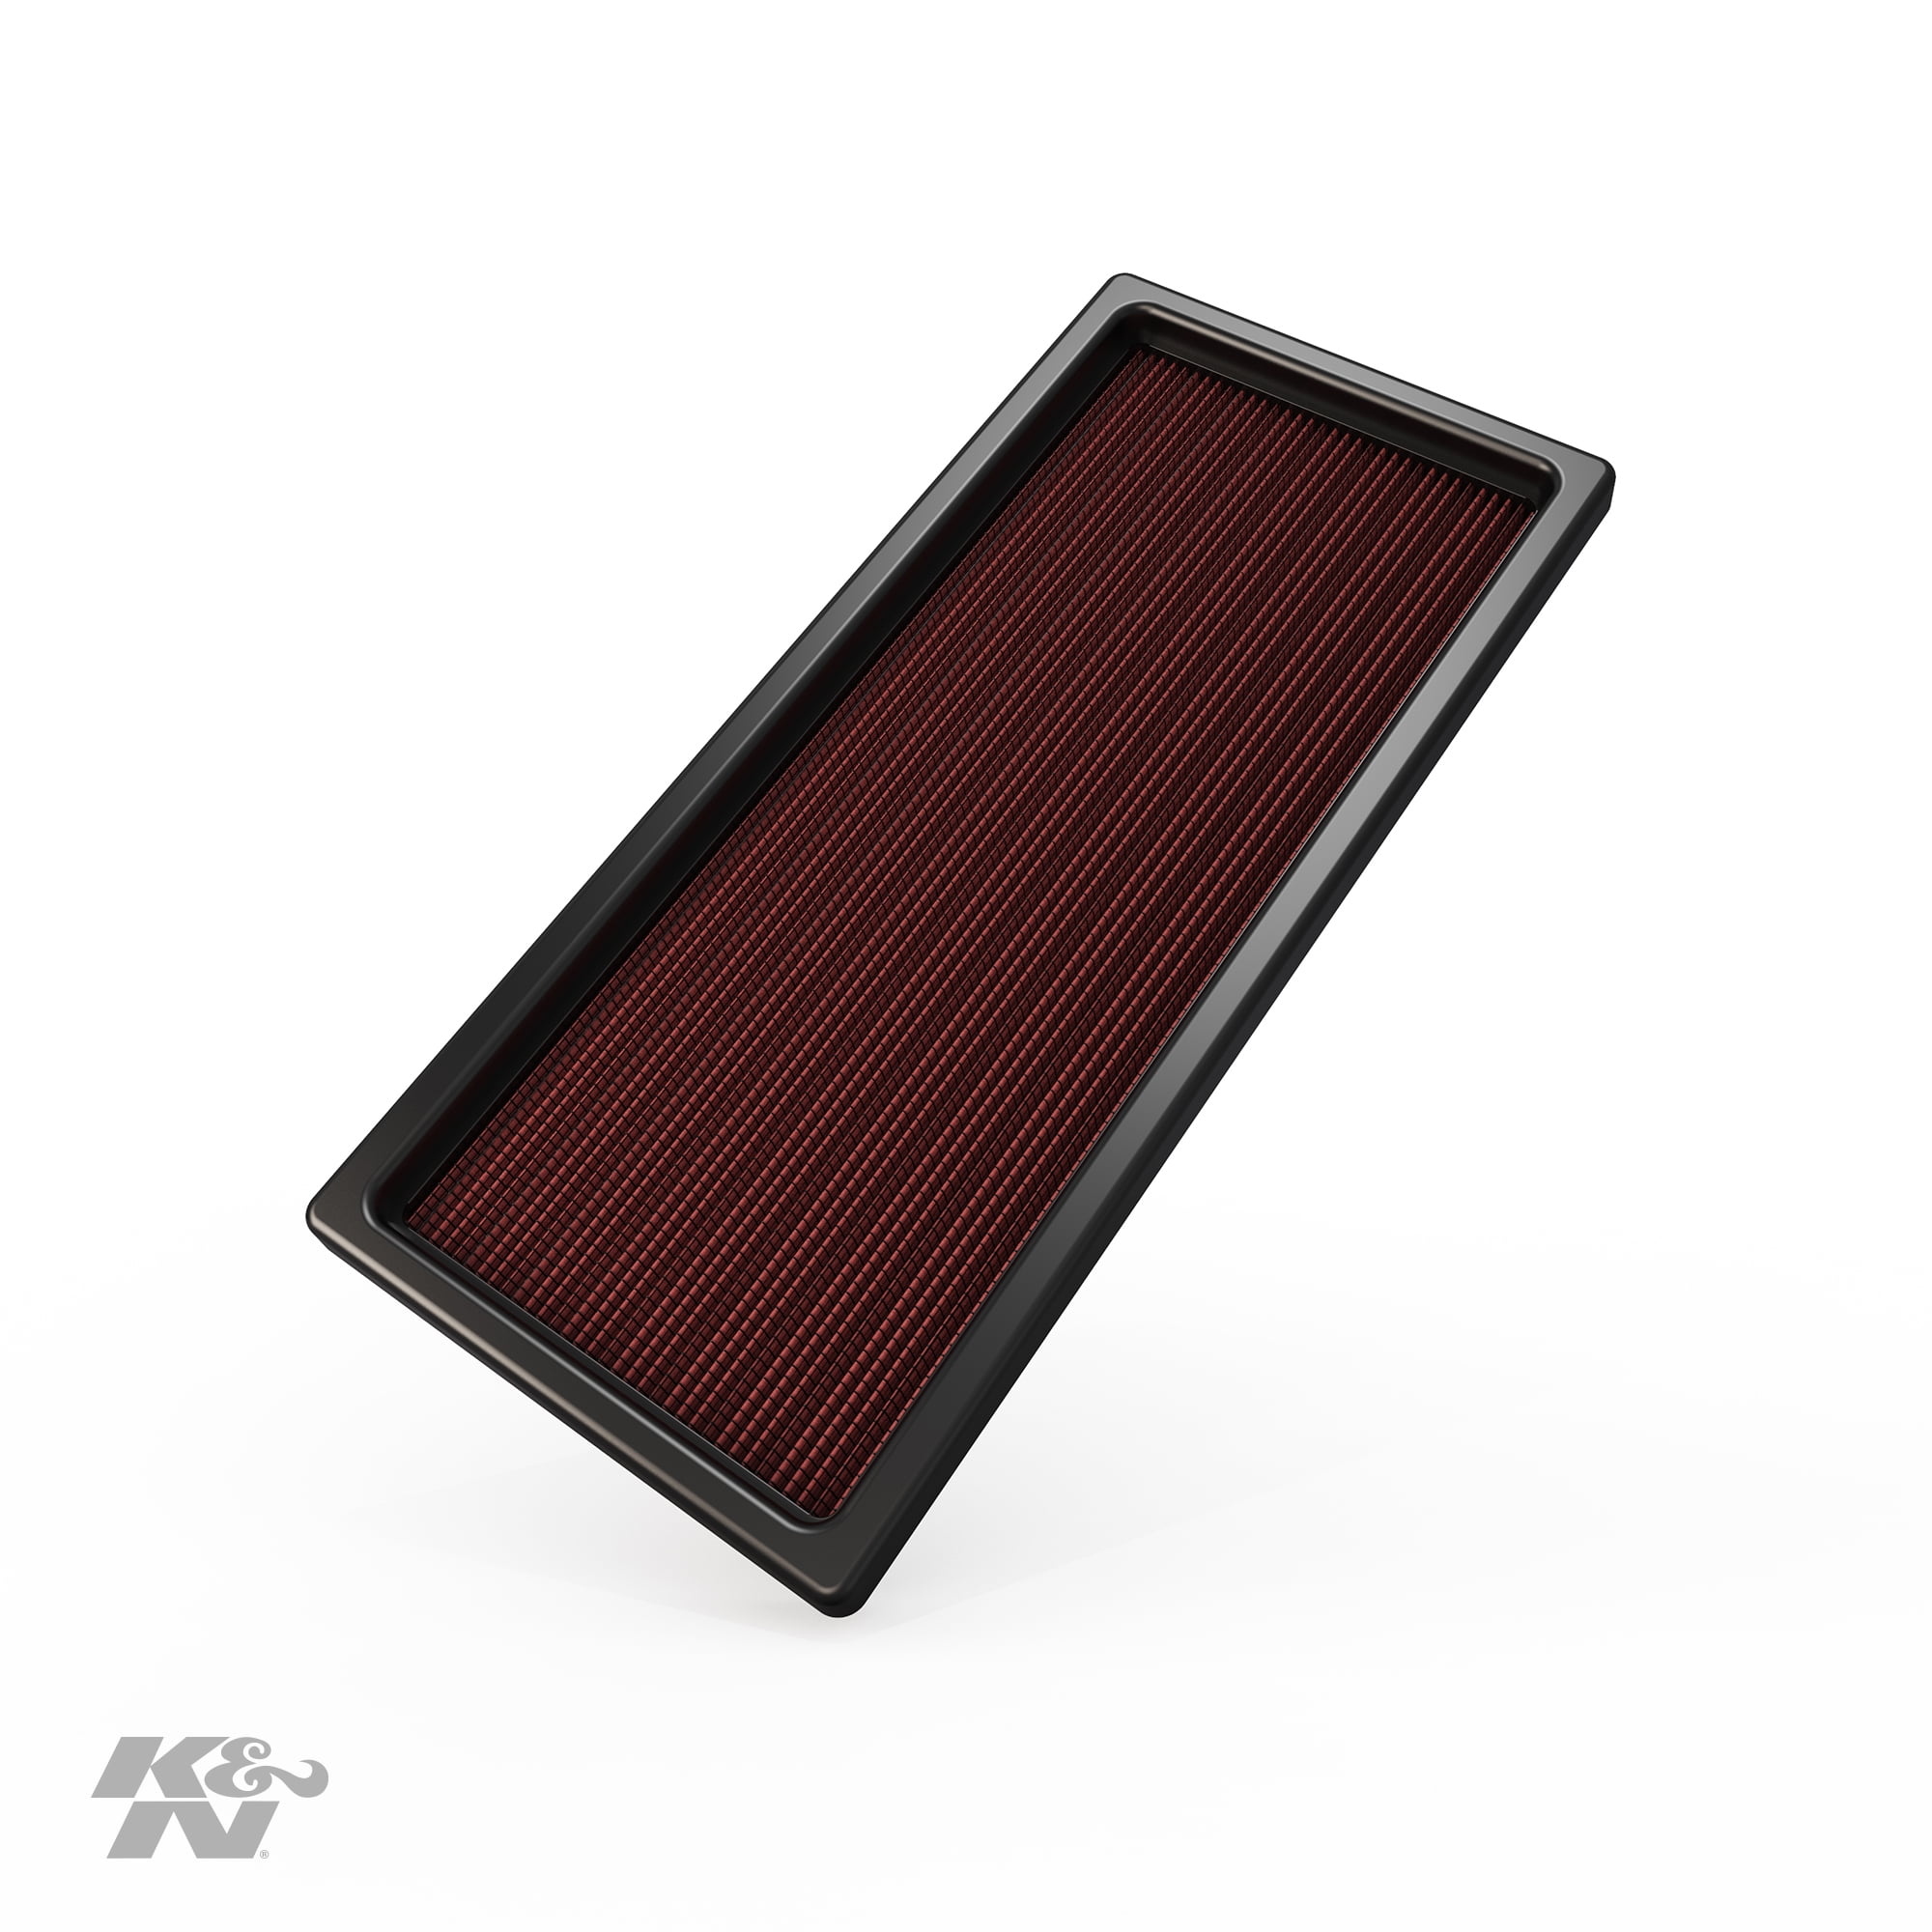 K&N E-3026R High Performance Replacement Air Filter